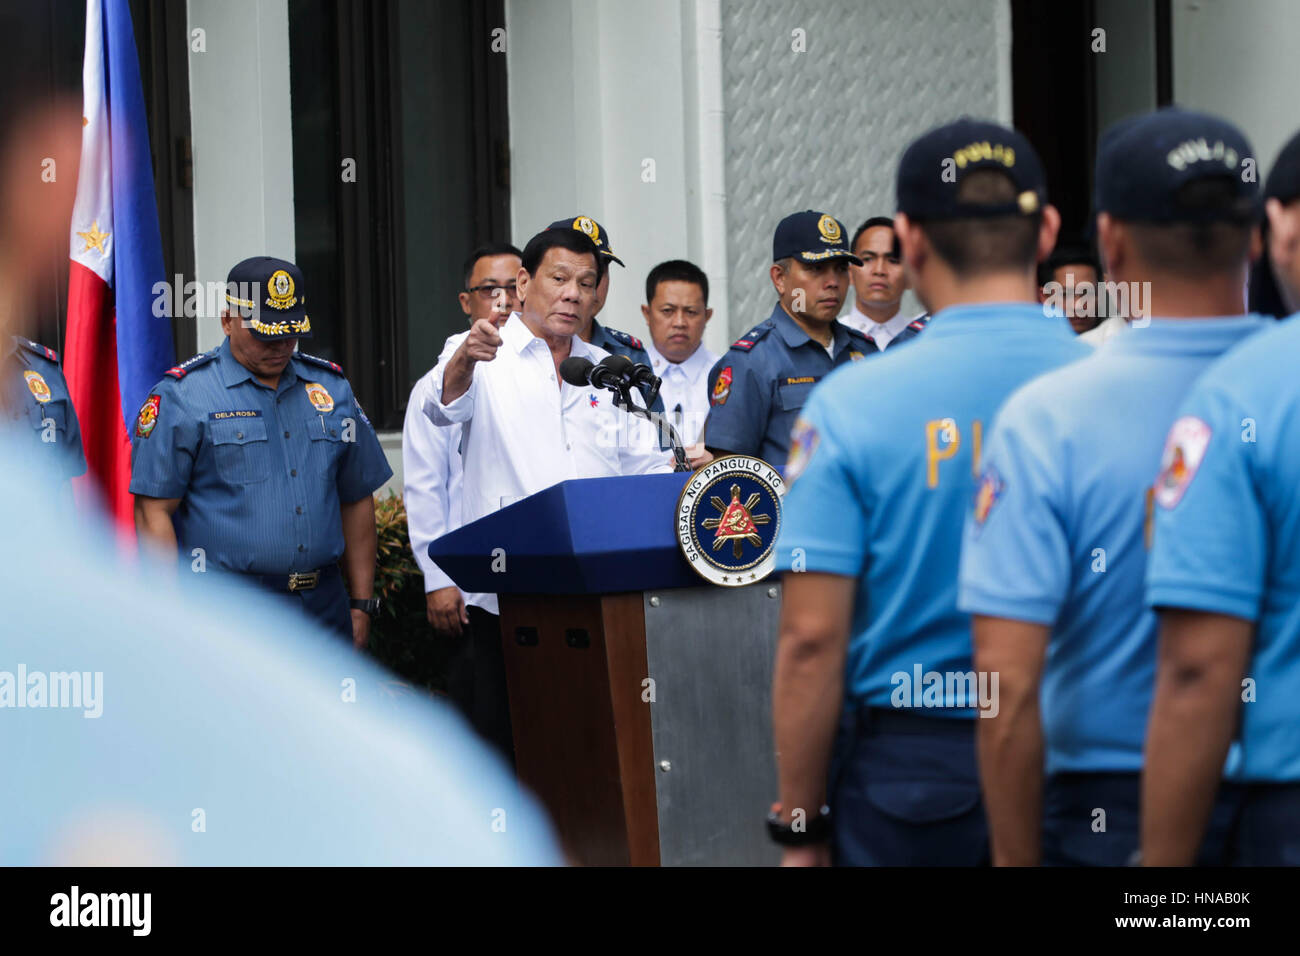 Philippine President Rodrigo Duterte addresses a group of police officers facing charges of corruption to be resigned to Basilan Island for two years at the Malacanang Palace February 7, 2017 in Manila, Philippines. The President gave the errant cops 15 days to decide whether to resign or accept their re-assignment. Stock Photo